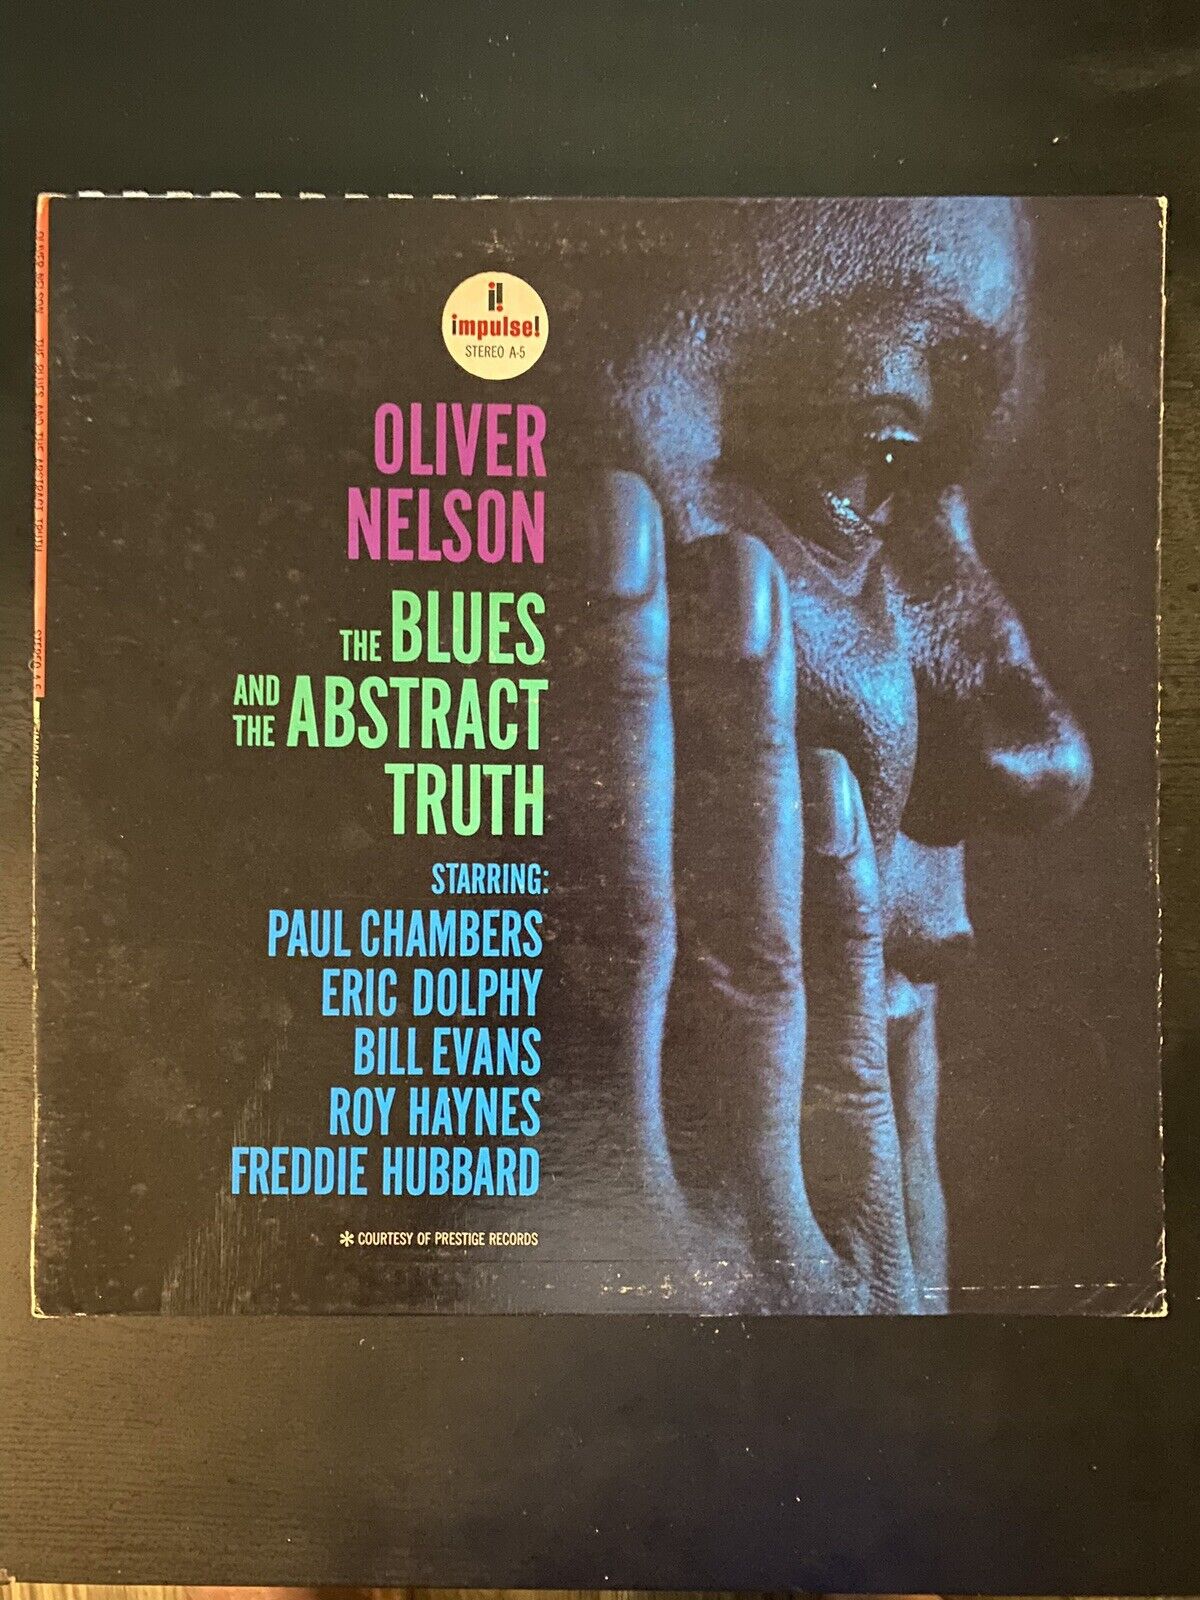 Oliver Nelson - The Blues And The Abstract Truth (LP, VG+, 1979 Re, Gatefold)